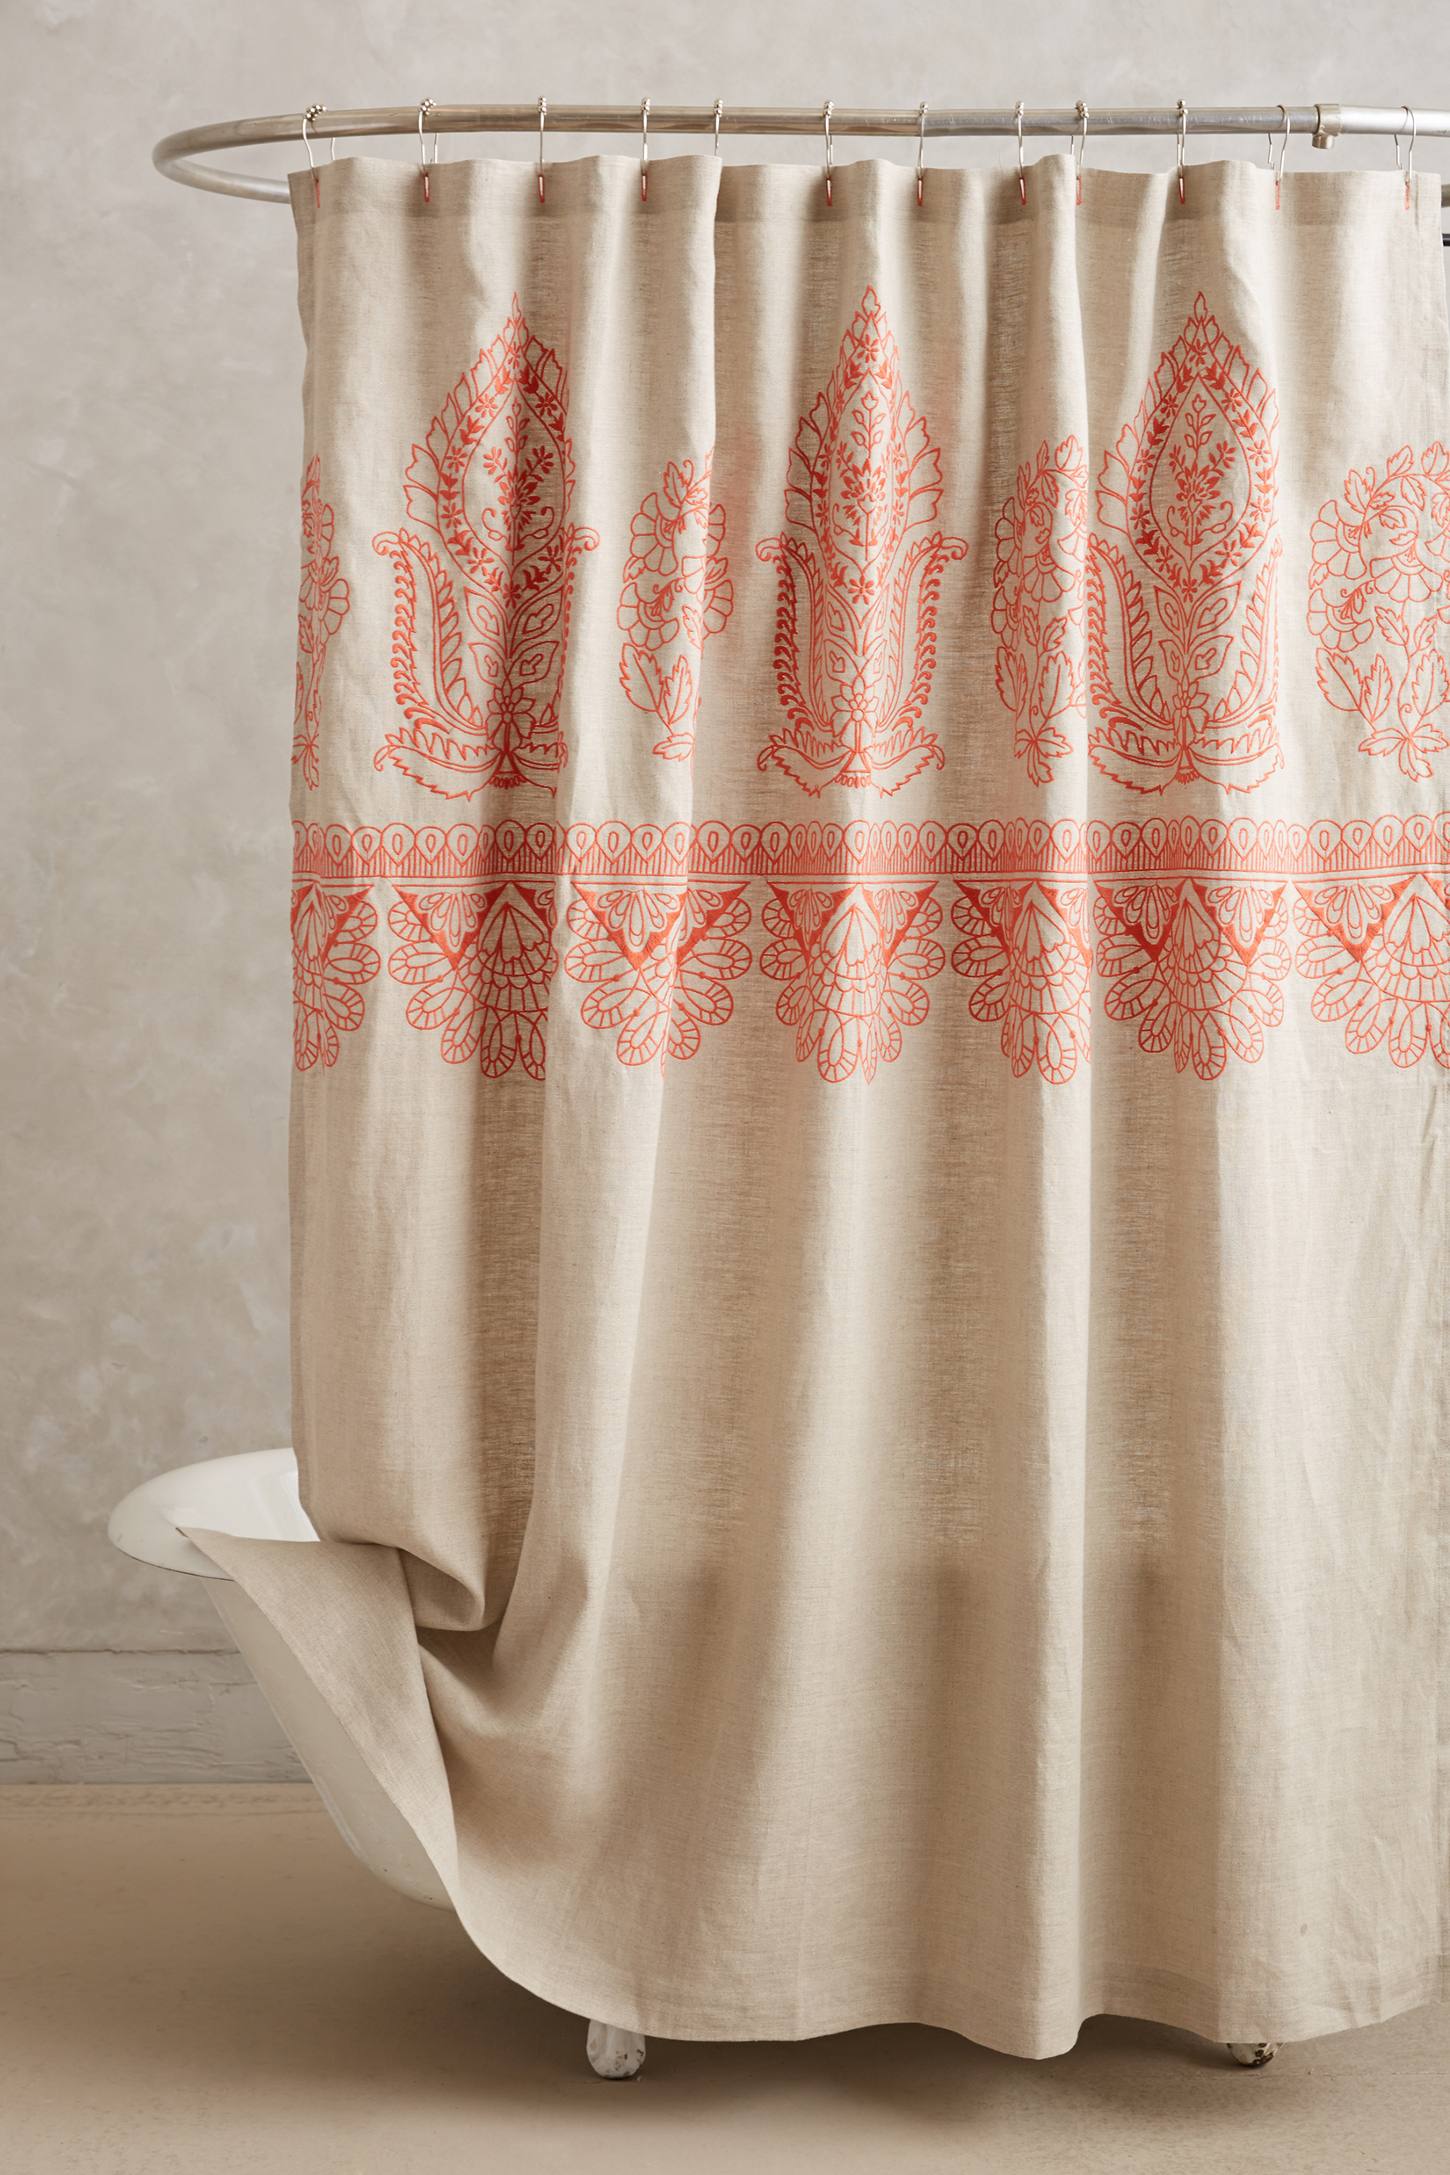 Top 20 Shower Curtains Decoholic, Natural Fabric Shower Curtain